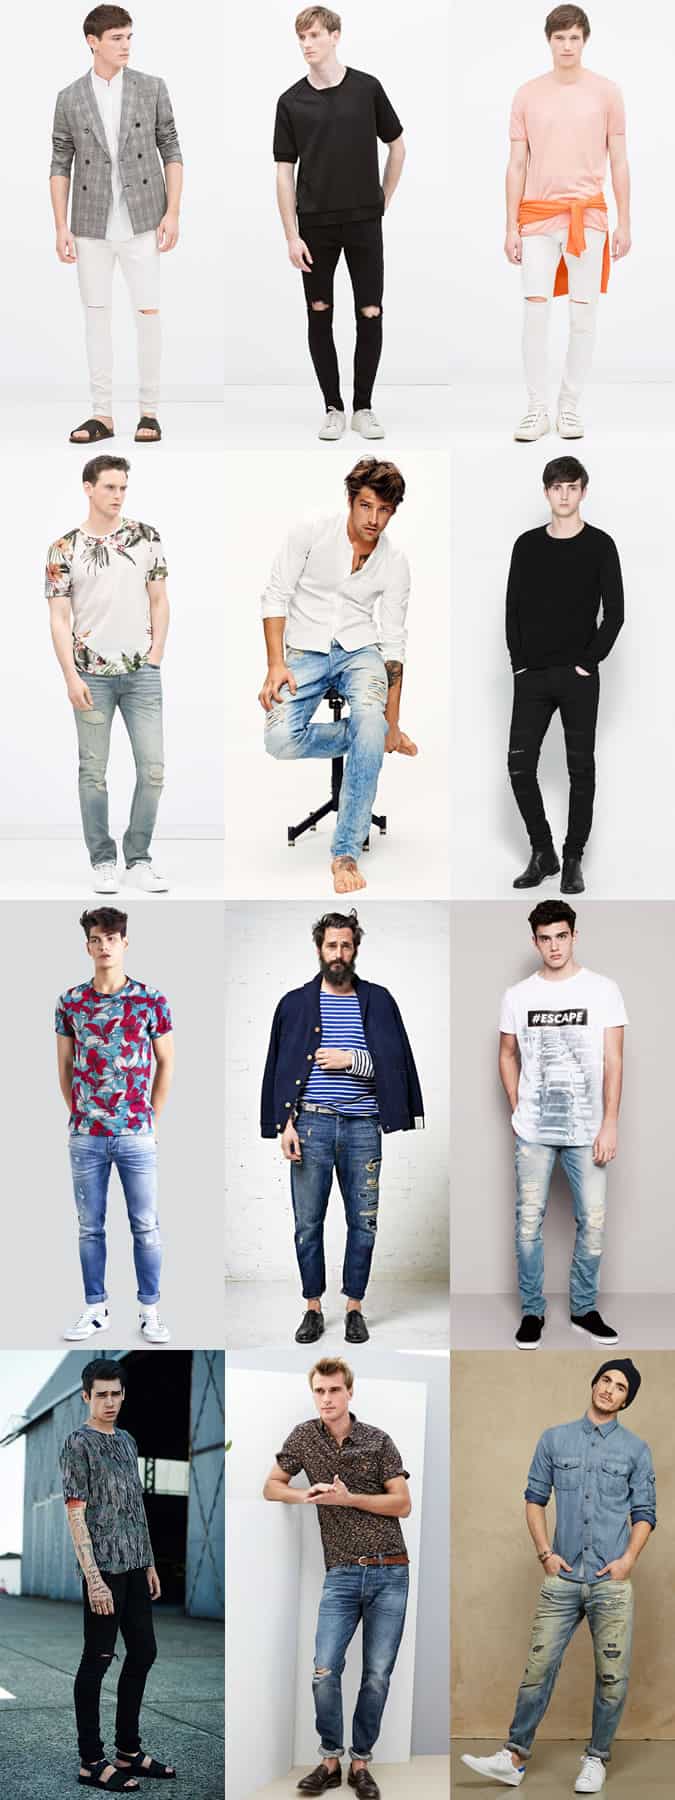 Men's Ripped and Distressed Jeans - Spring/Summer Outfit Inspiration Lookbook